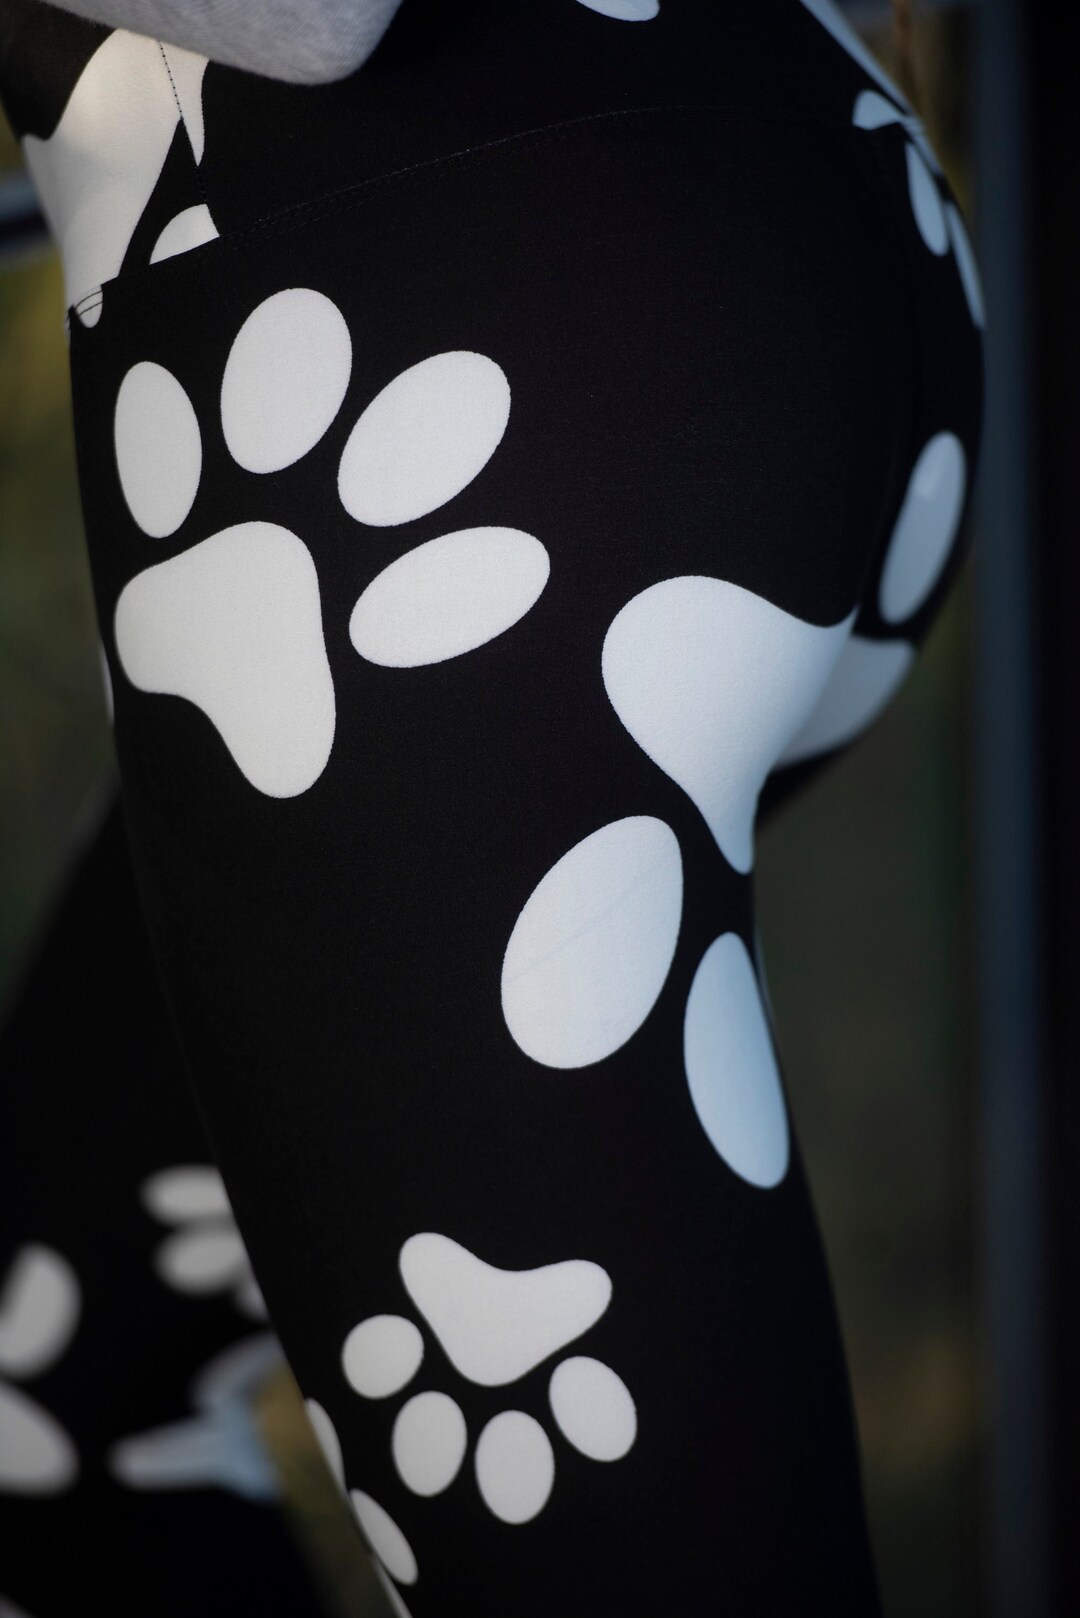 Black Dog Paw Print Leggings for Women With 5 High Waist, Slimming, Yoga  Pants, Buttery Soft, Non-see Through, One Size, Plus Size Leggings 